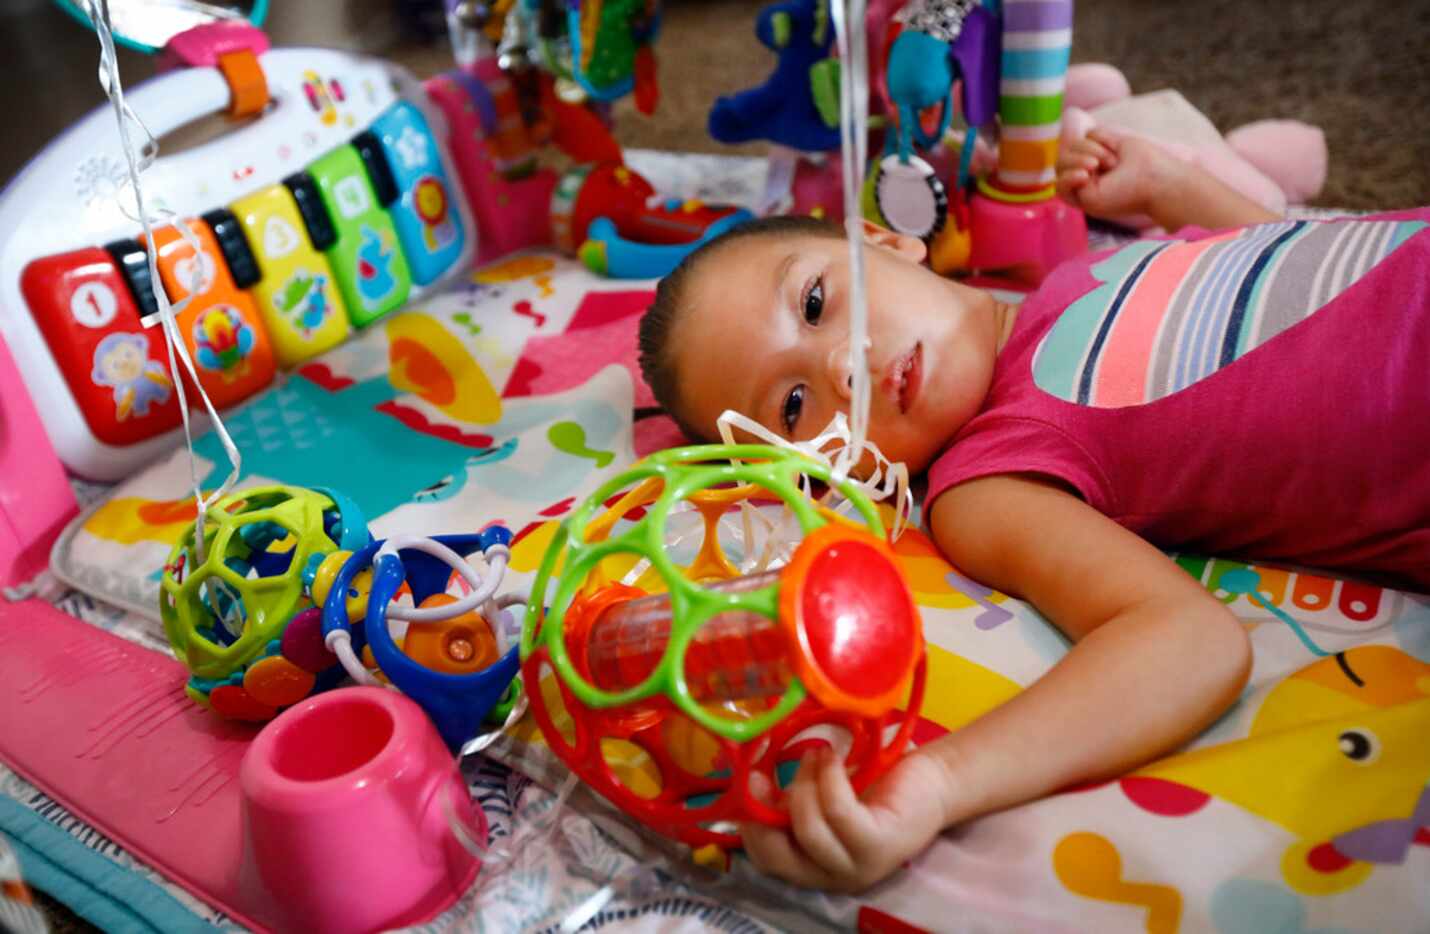 Annalynne Magallon, who has cerebral palsy, spends a lot of time on her back playing with...